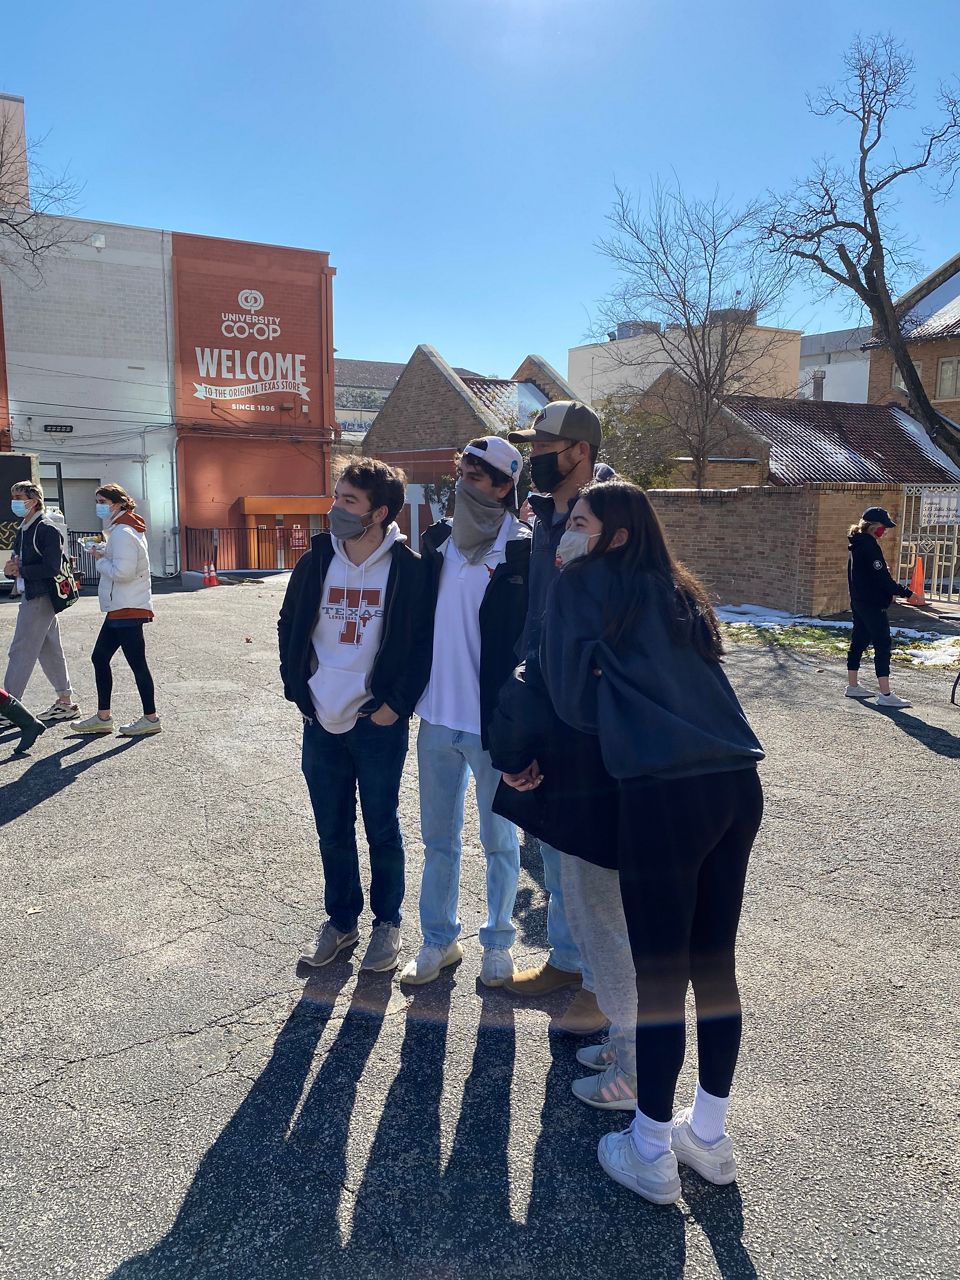 Students pose for a picture on the campus of University of Texas at Austin in this image from February 20, 2021. (Travis Recek/Spectrum News 1)